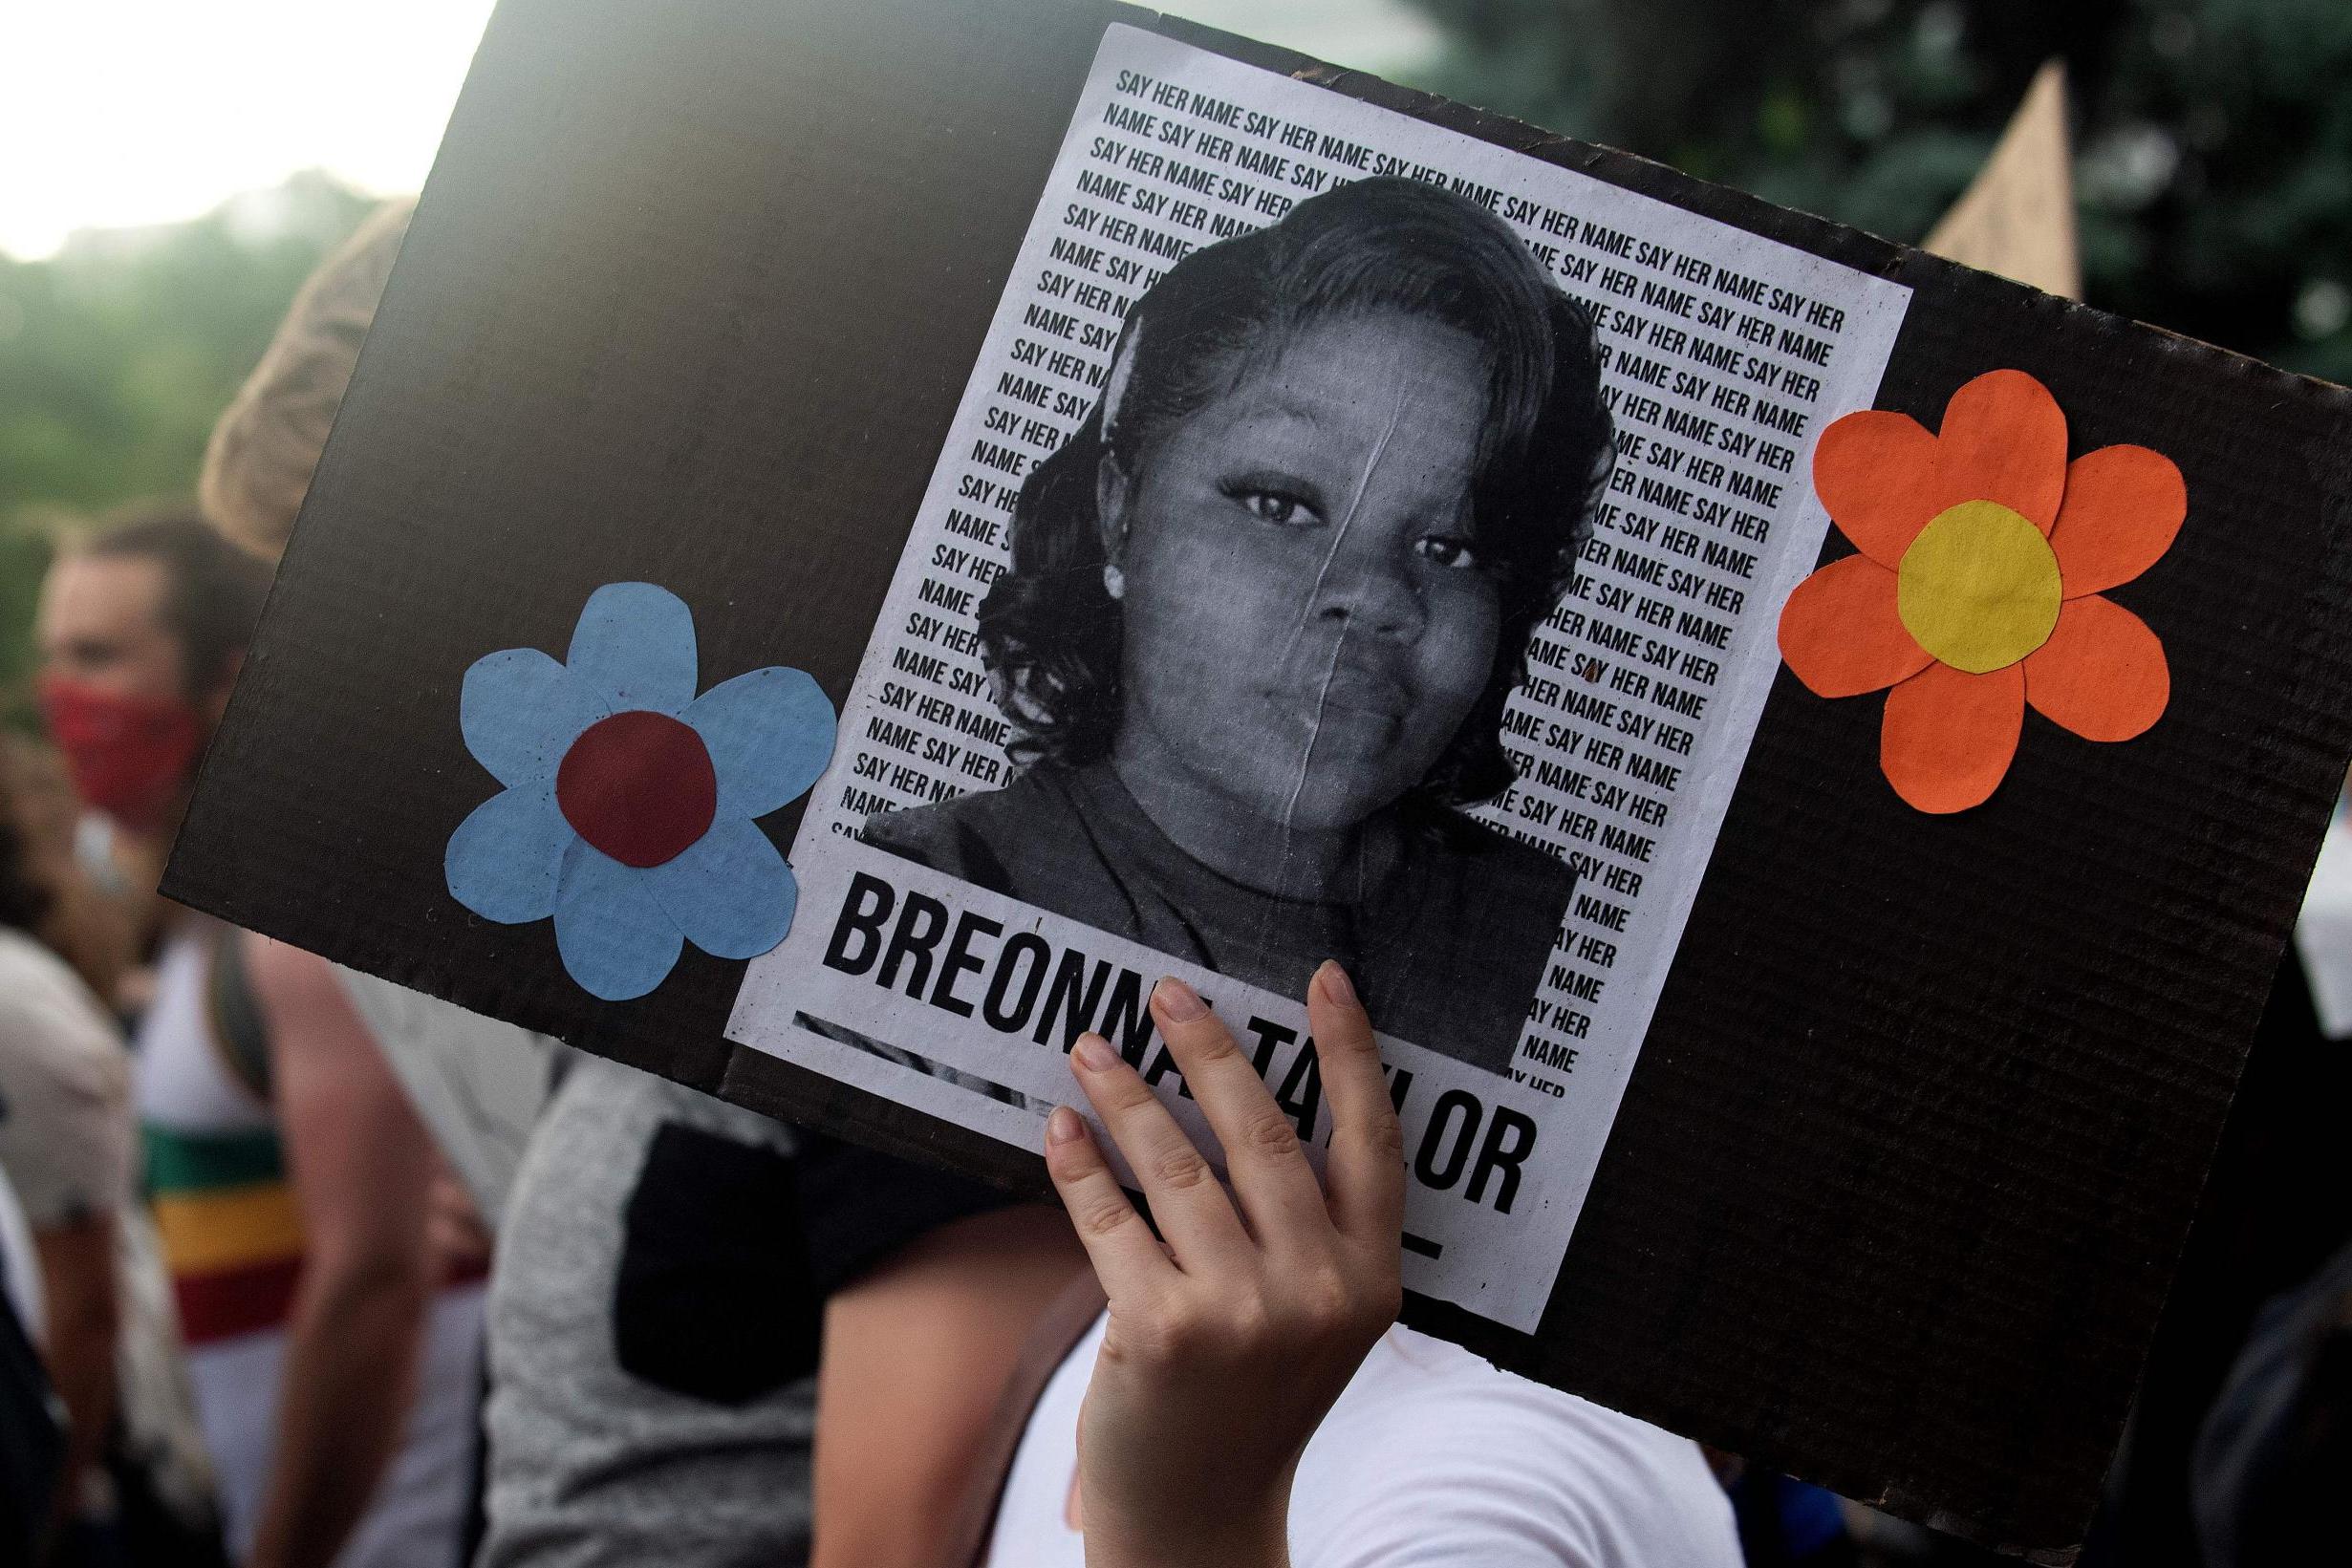 A demonstrator holds a sign with the image of Breonna Taylor during a protest in Denver, Colorado on 3 June 2020.